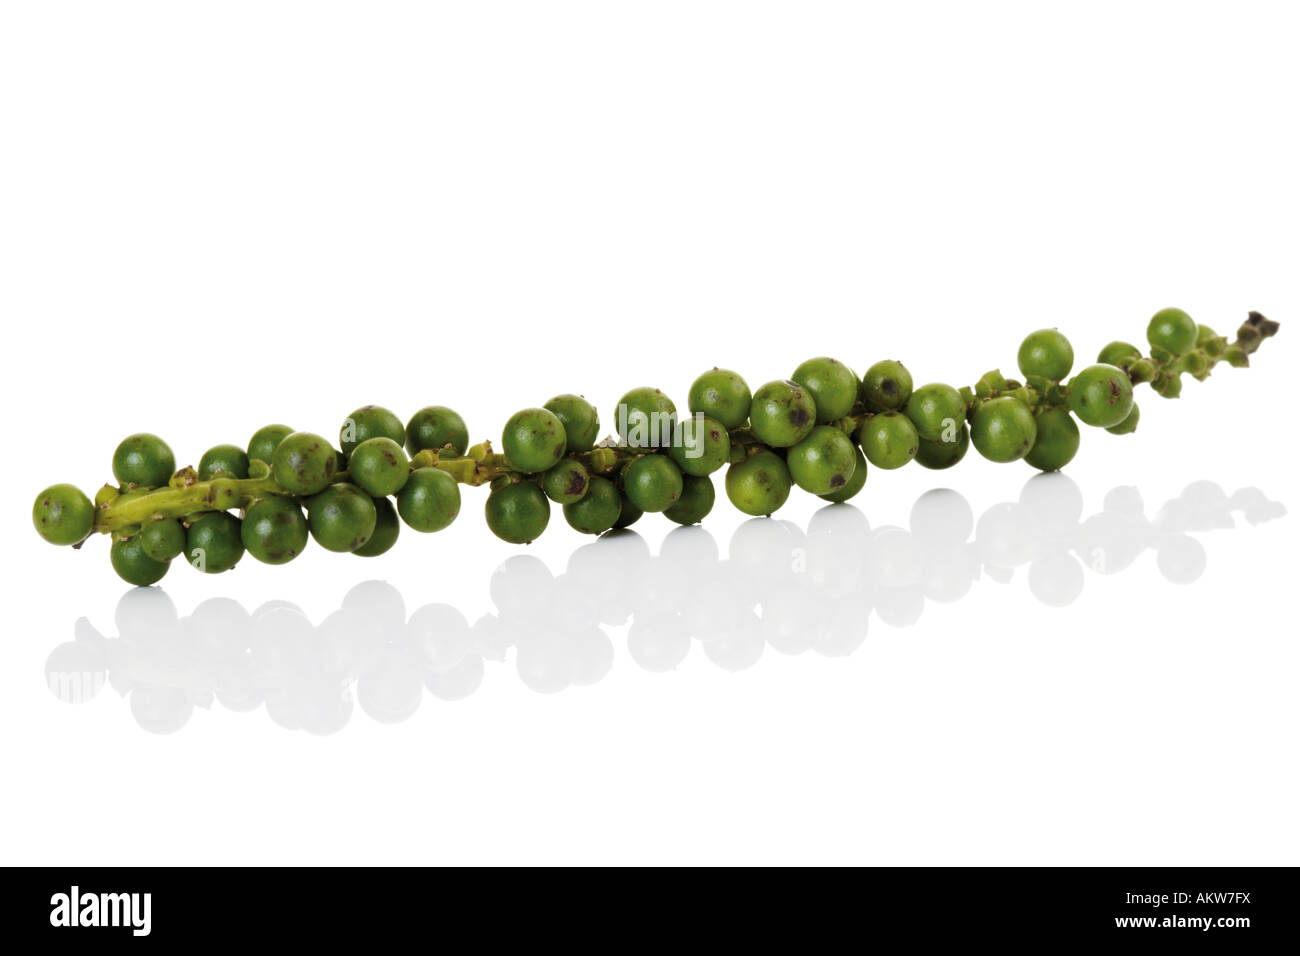 Green pepper panicle, close-up Stock Photo